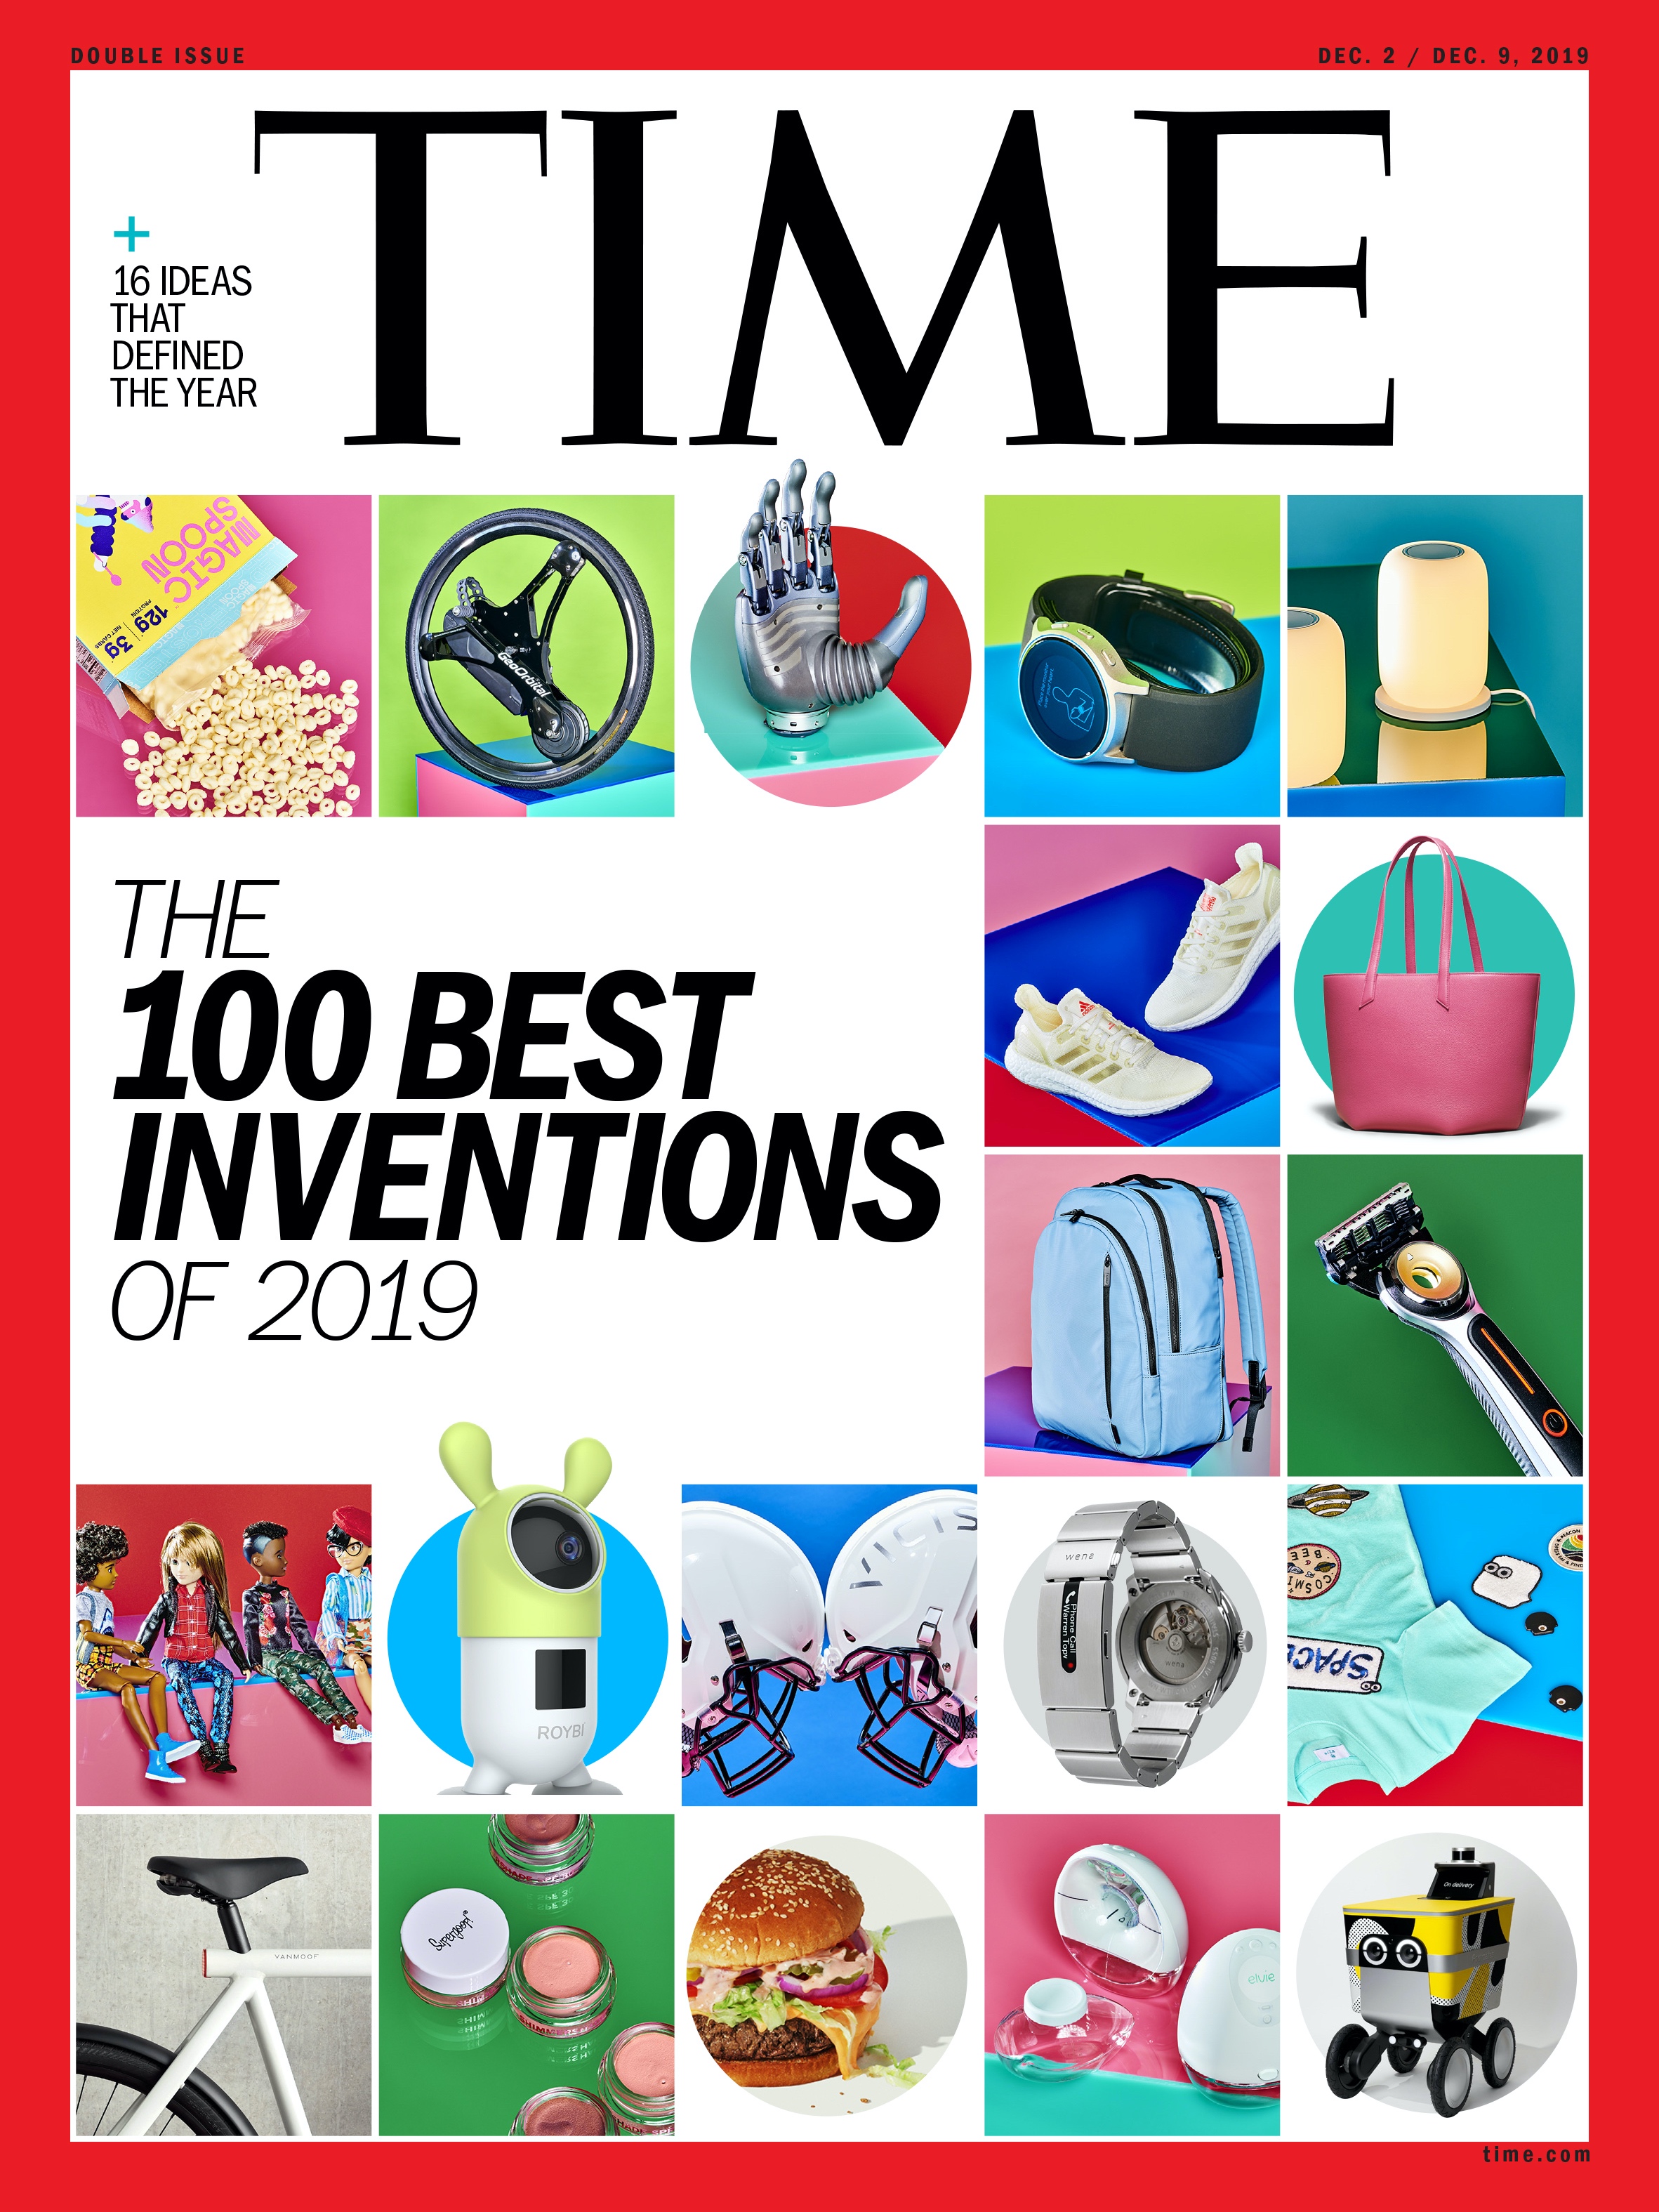 Moxi by Diligent Robotics Named One of TIME’s 100 Best Inventions of 2019